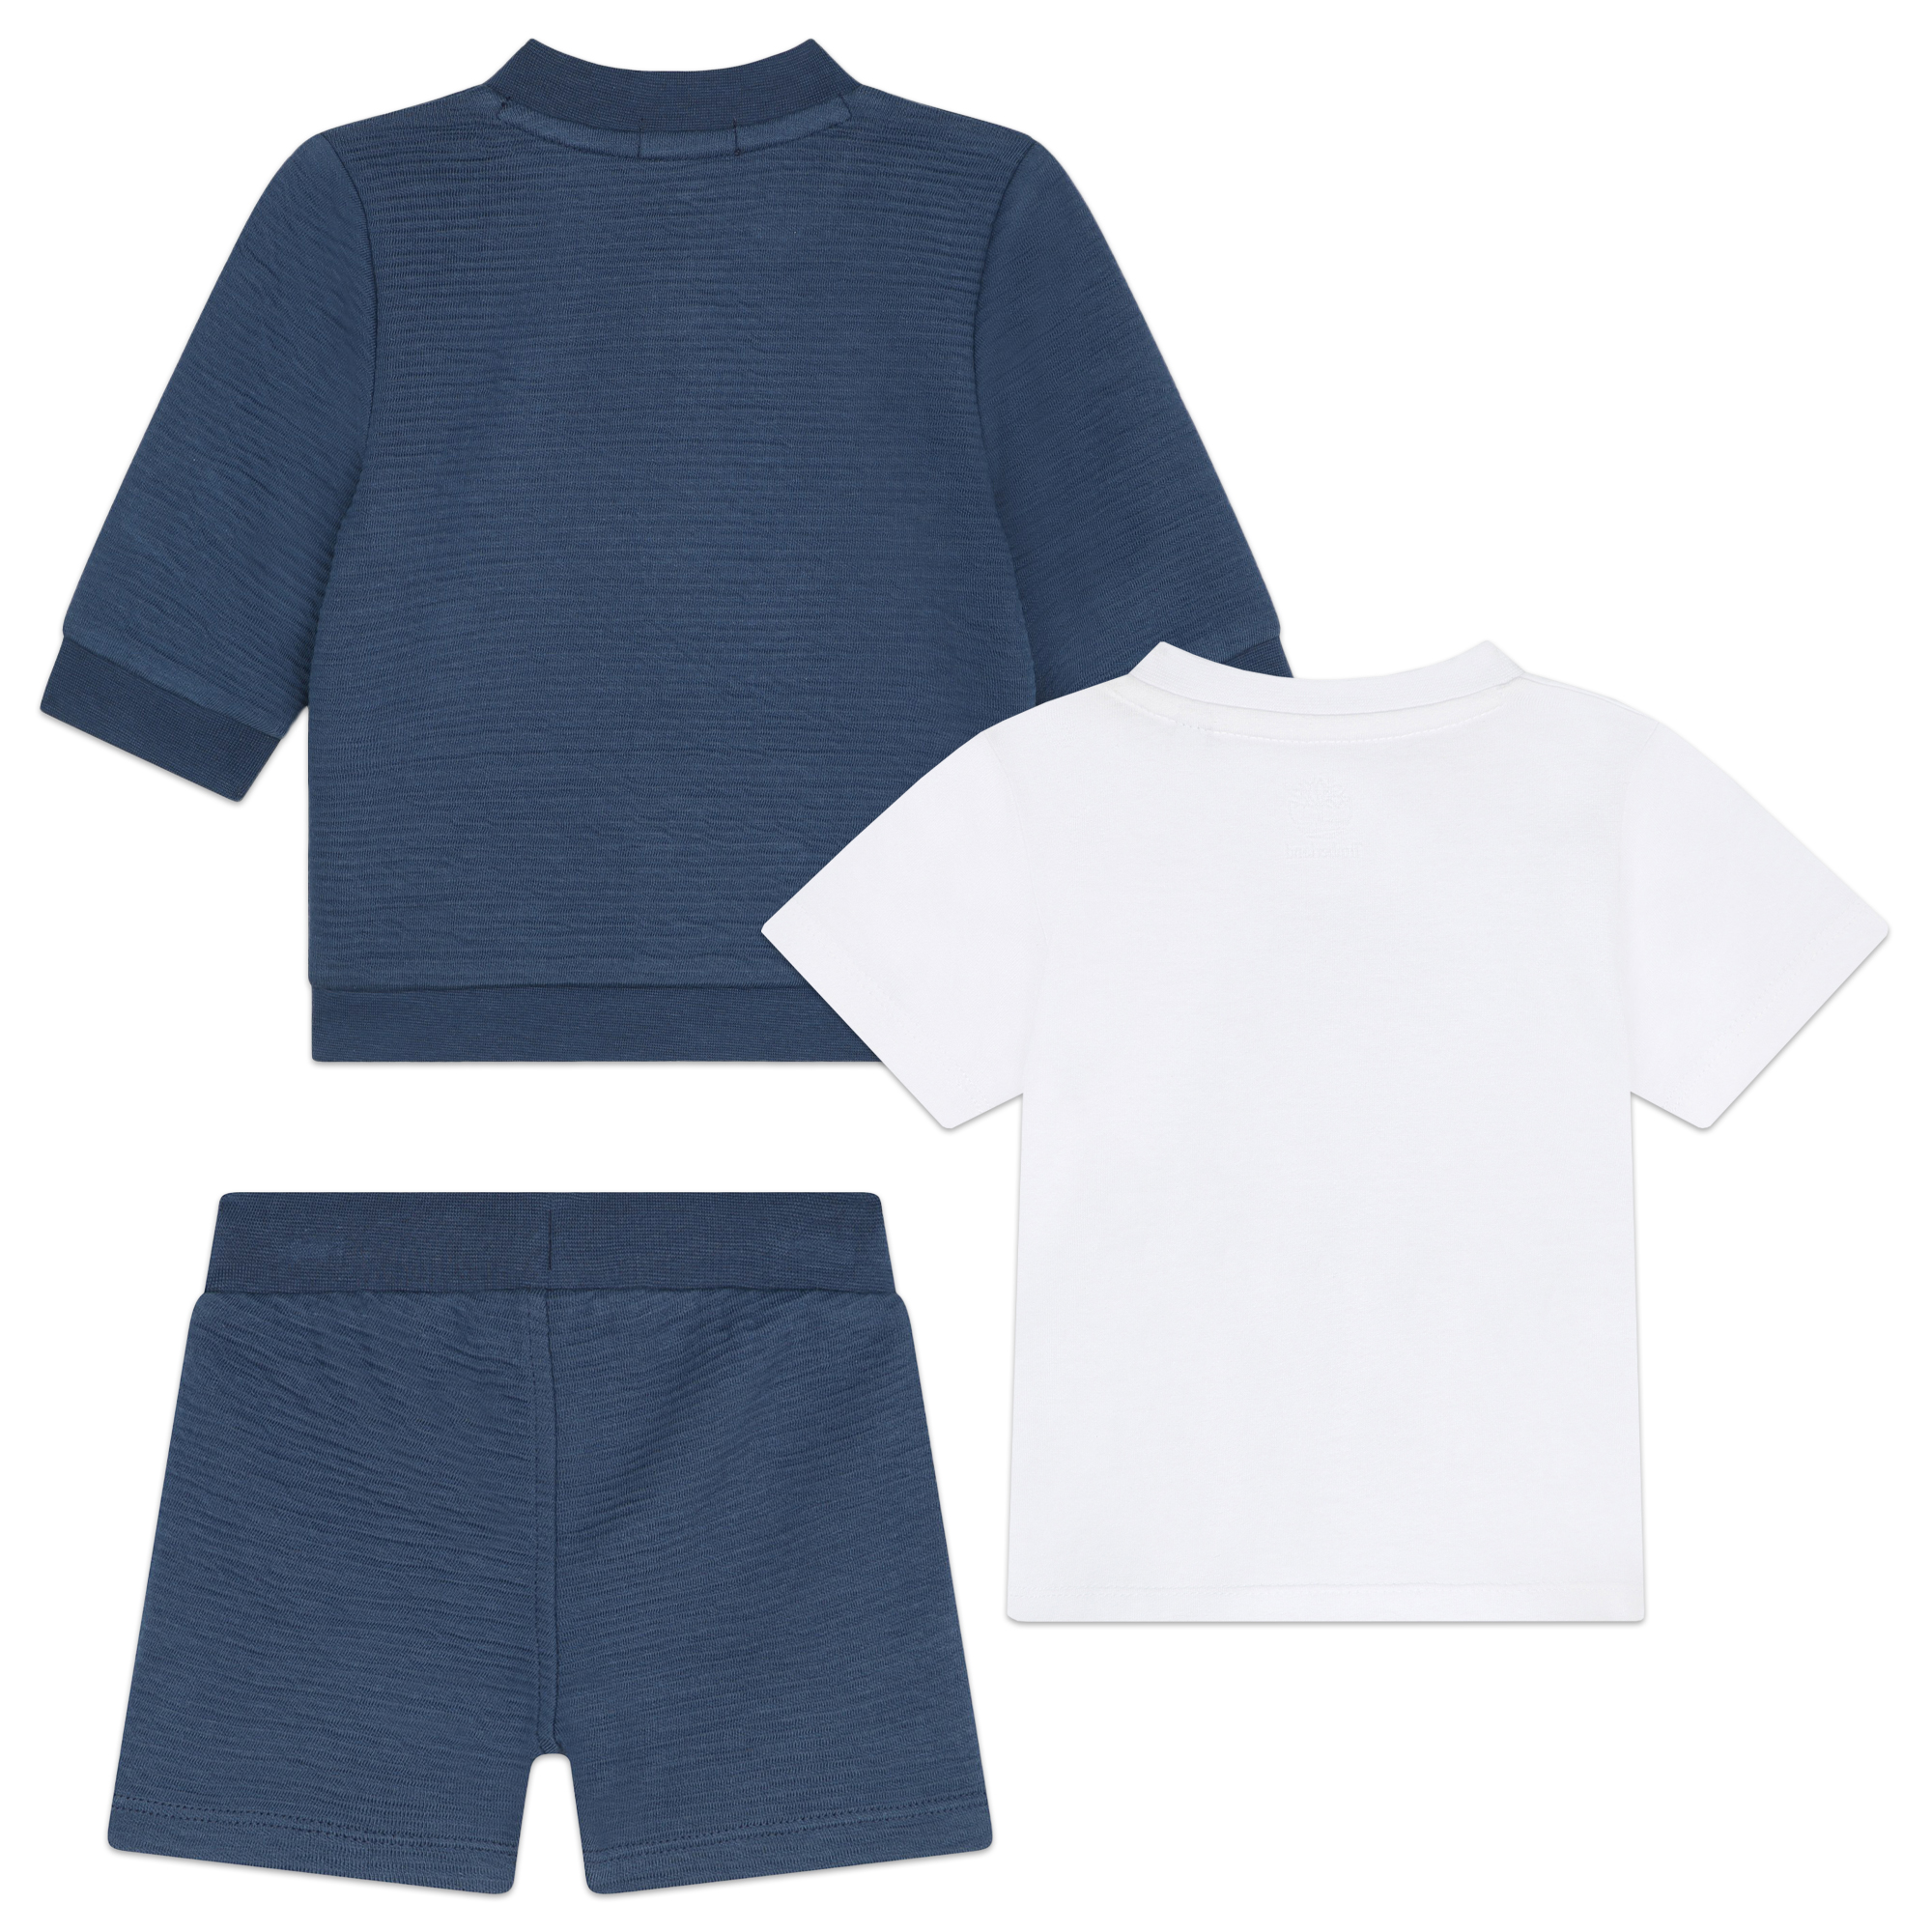 Cardigan, T-shirt and shorts TIMBERLAND for BOY